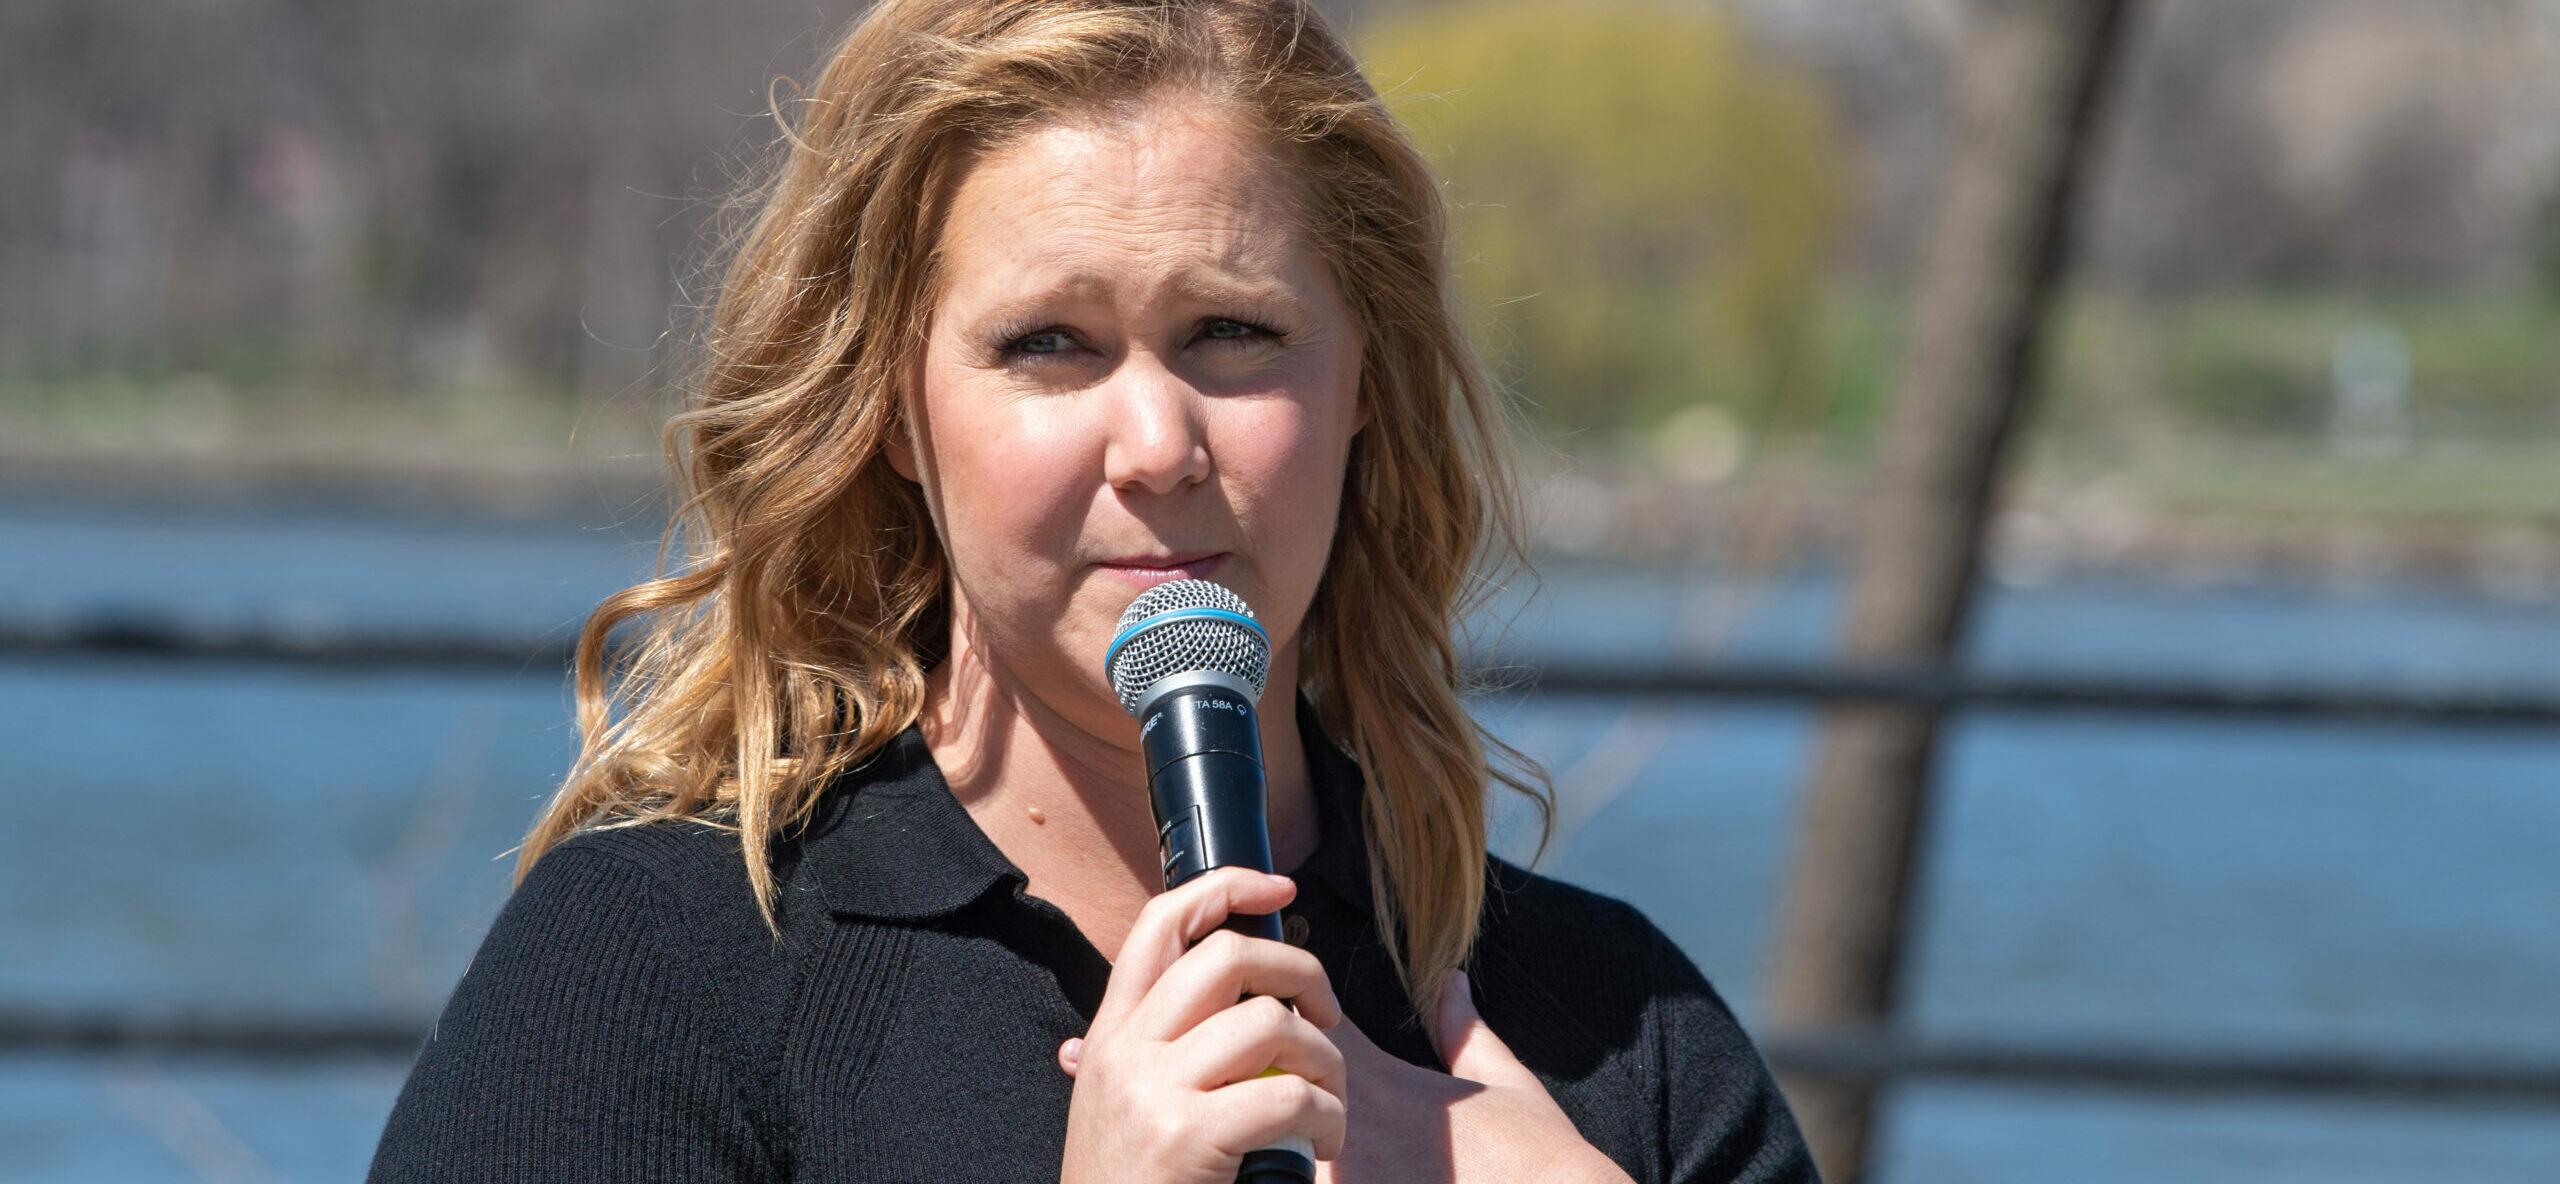 Amy Schumer Asks For Public’s Help: #FreeTheGrilledCheese!